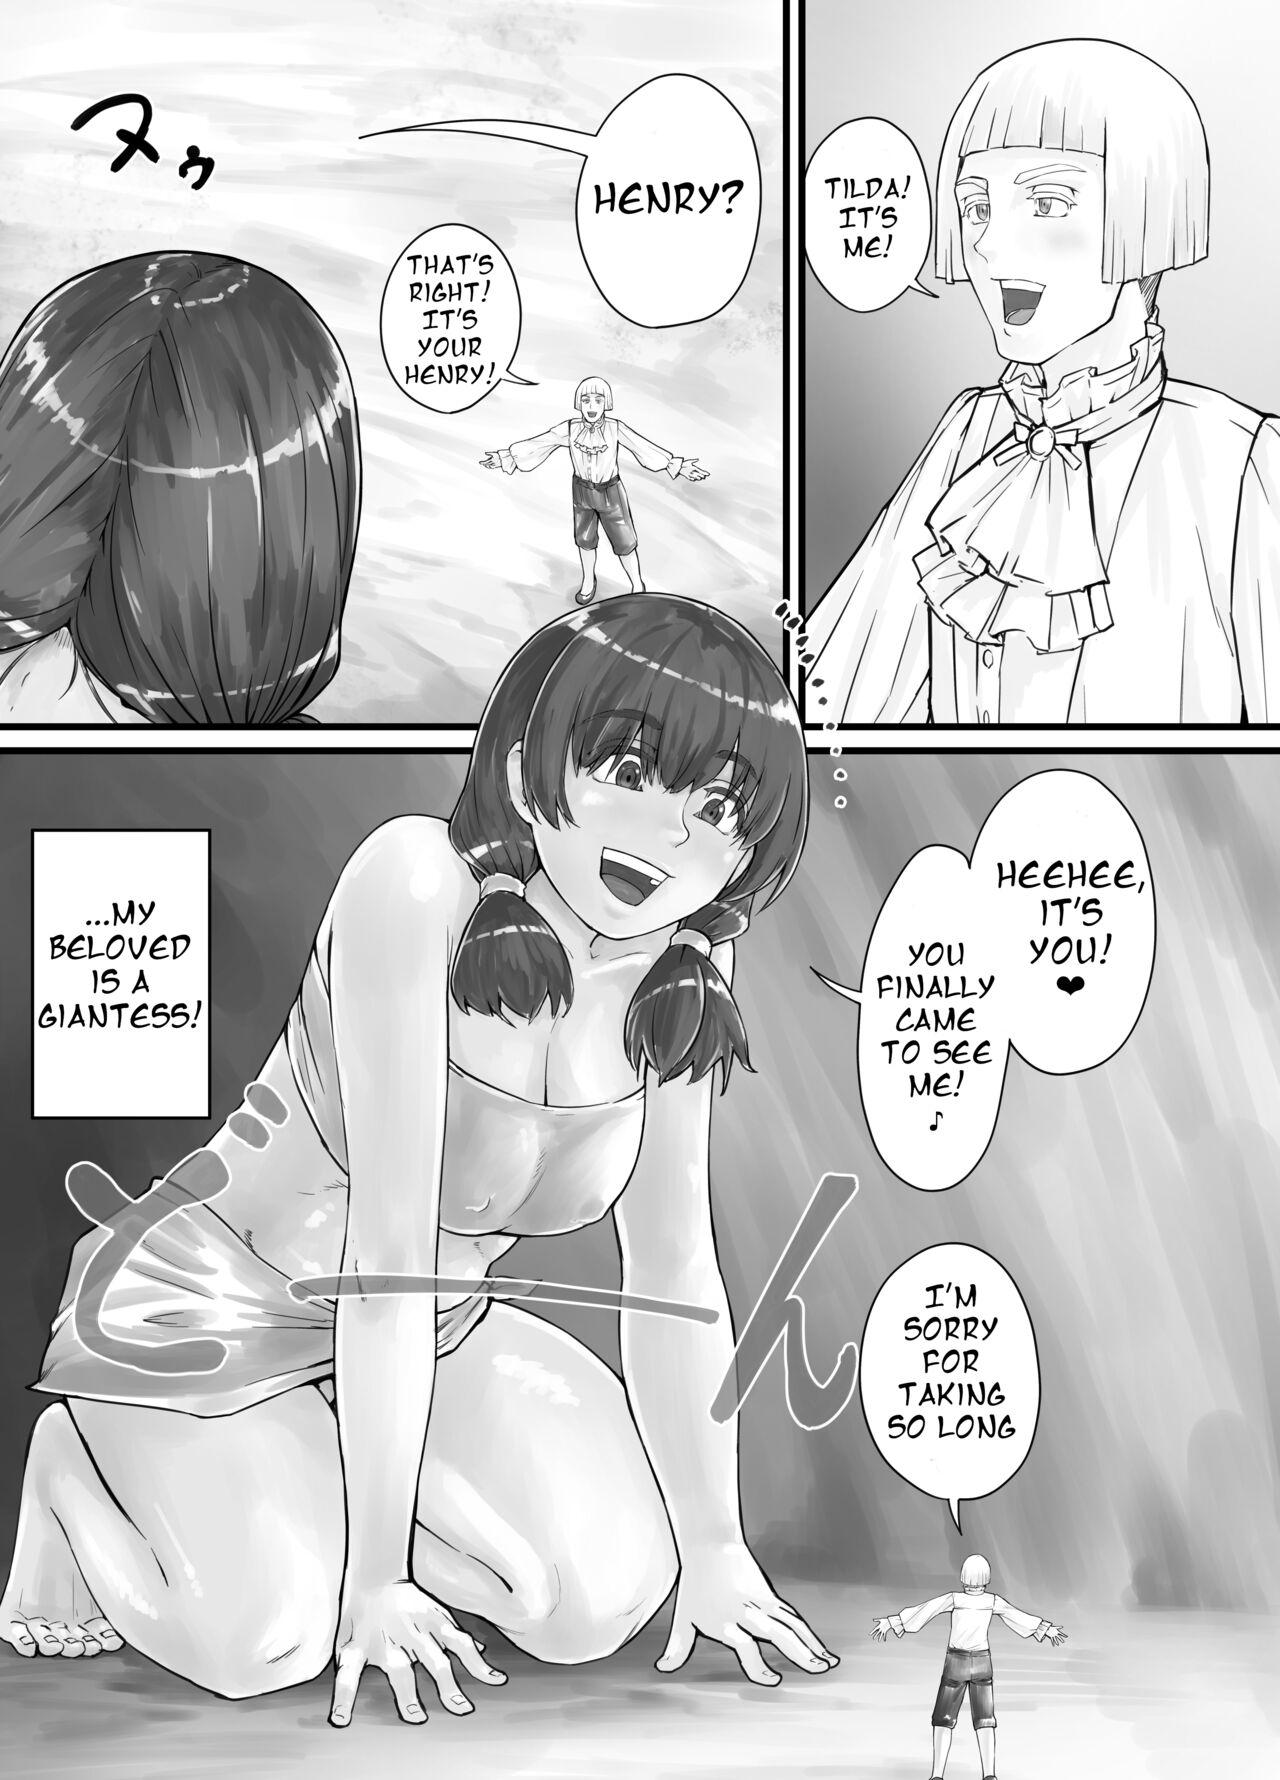 Assfuck 巨人娘ちゃん漫画 Ch.1-4（English Version） - Original Good - Picture 2